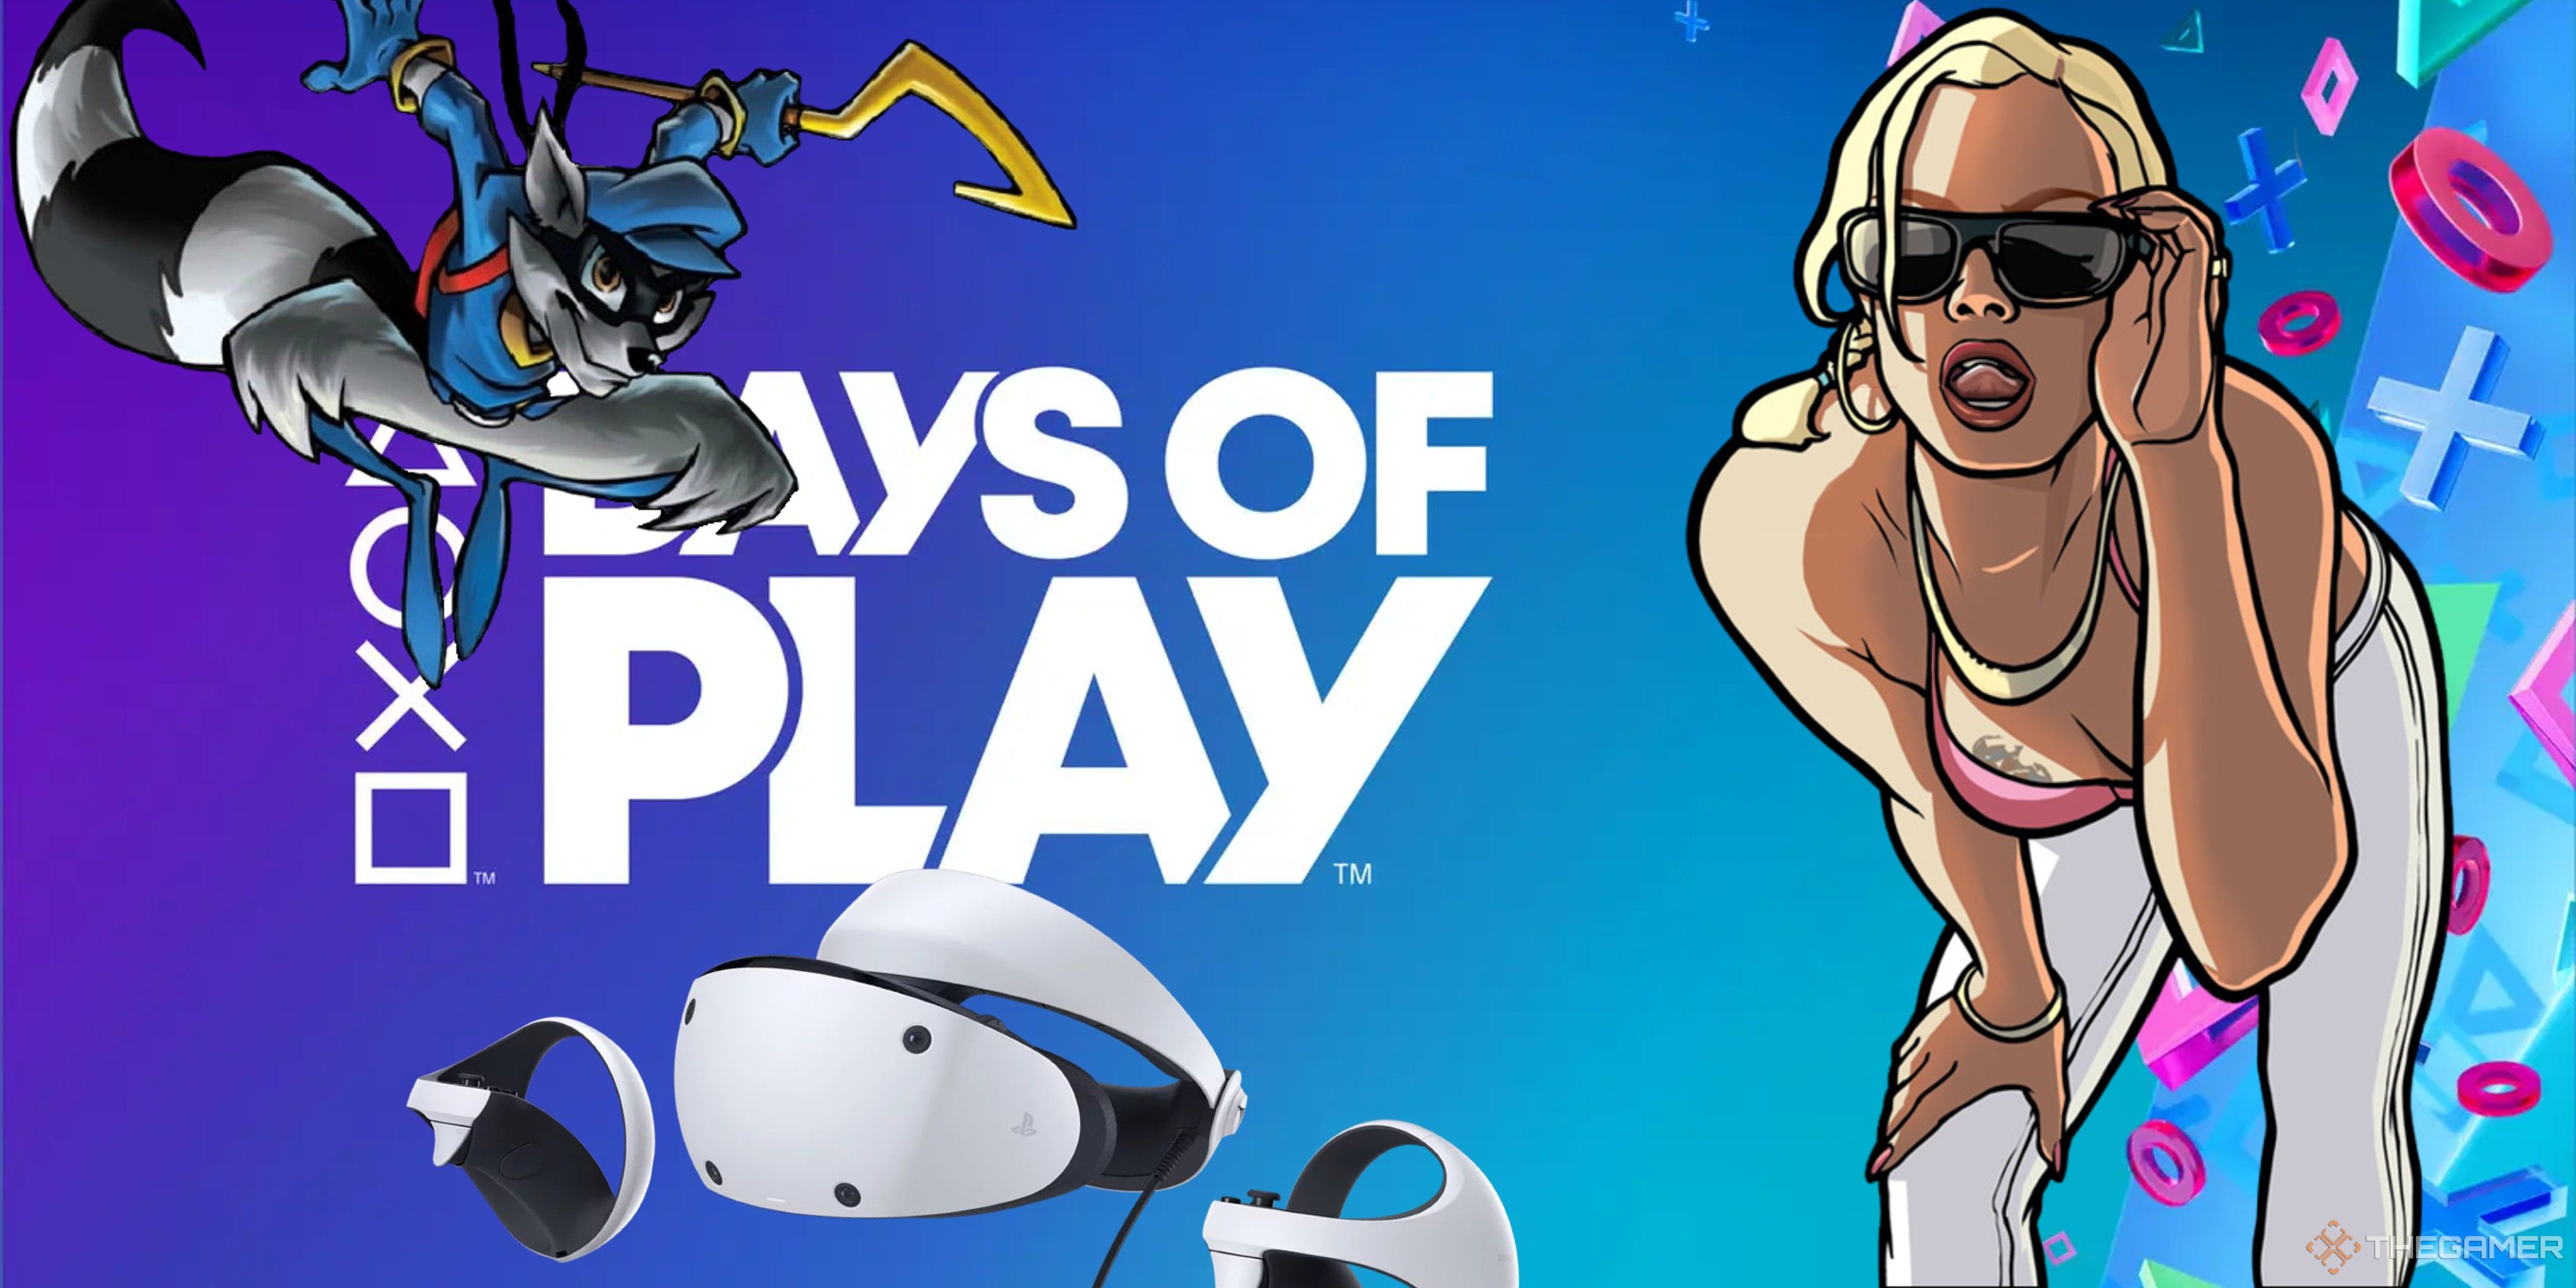 sly cooper ps vr2 and san andreas cover star on a days of play backdrop